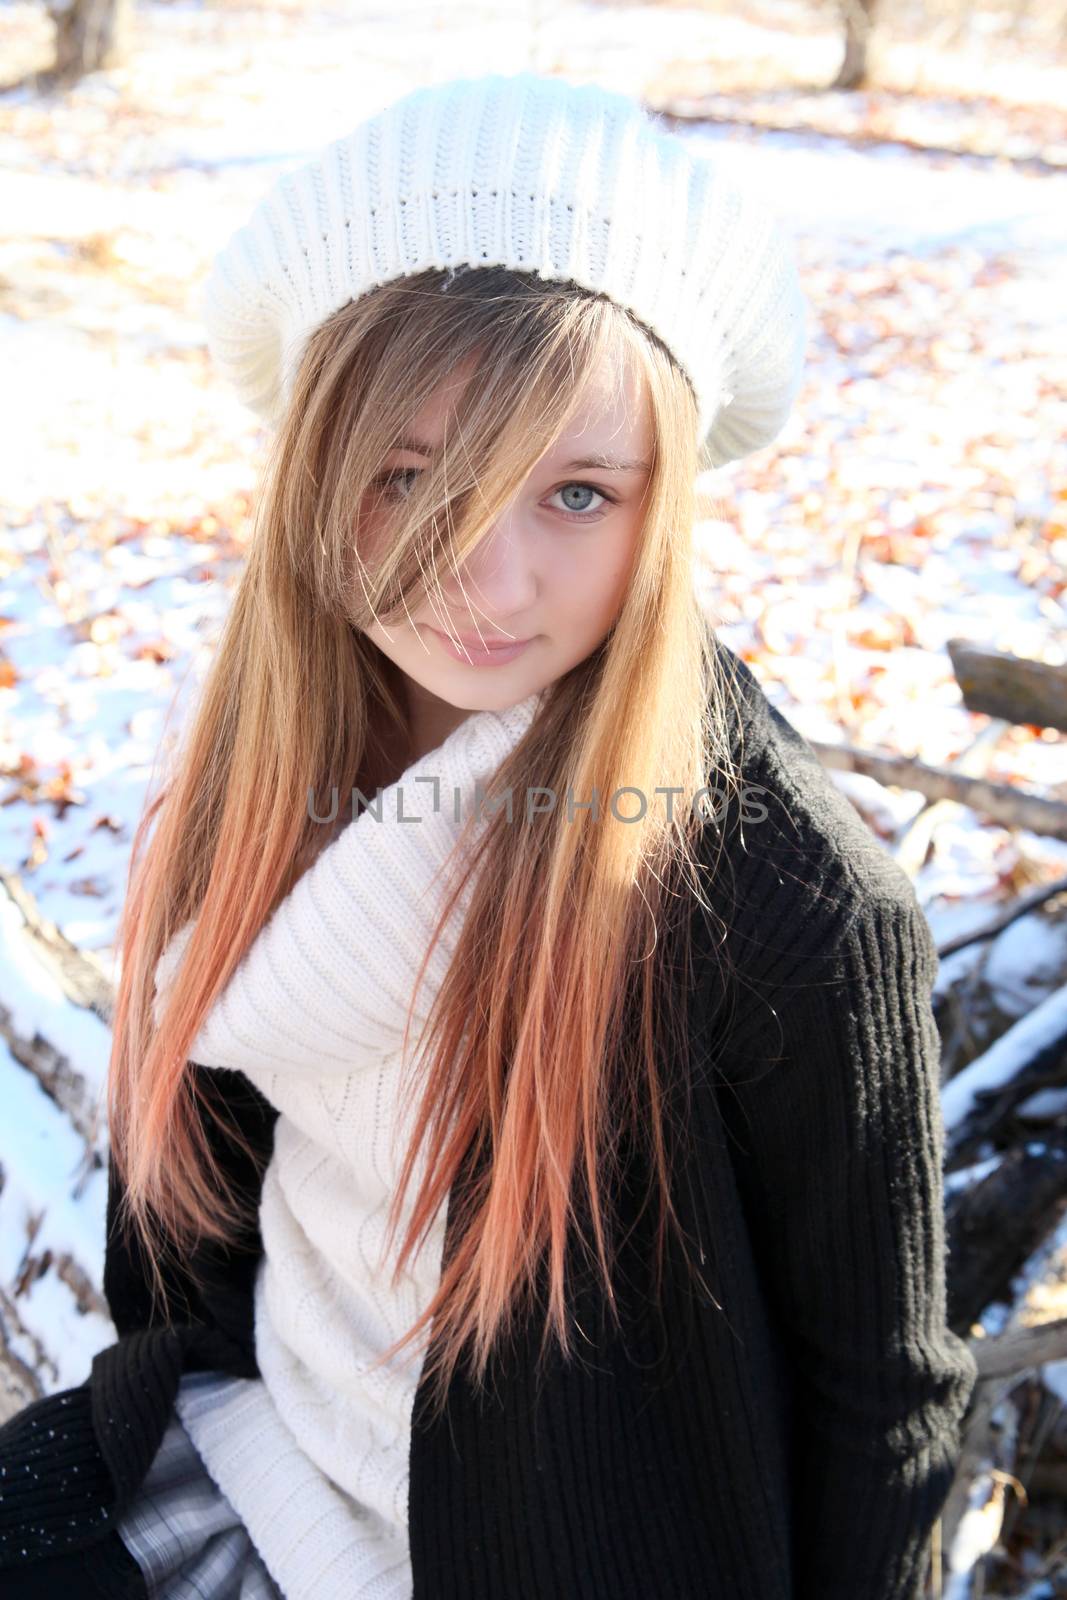 Teen girl outside on a cold winters day